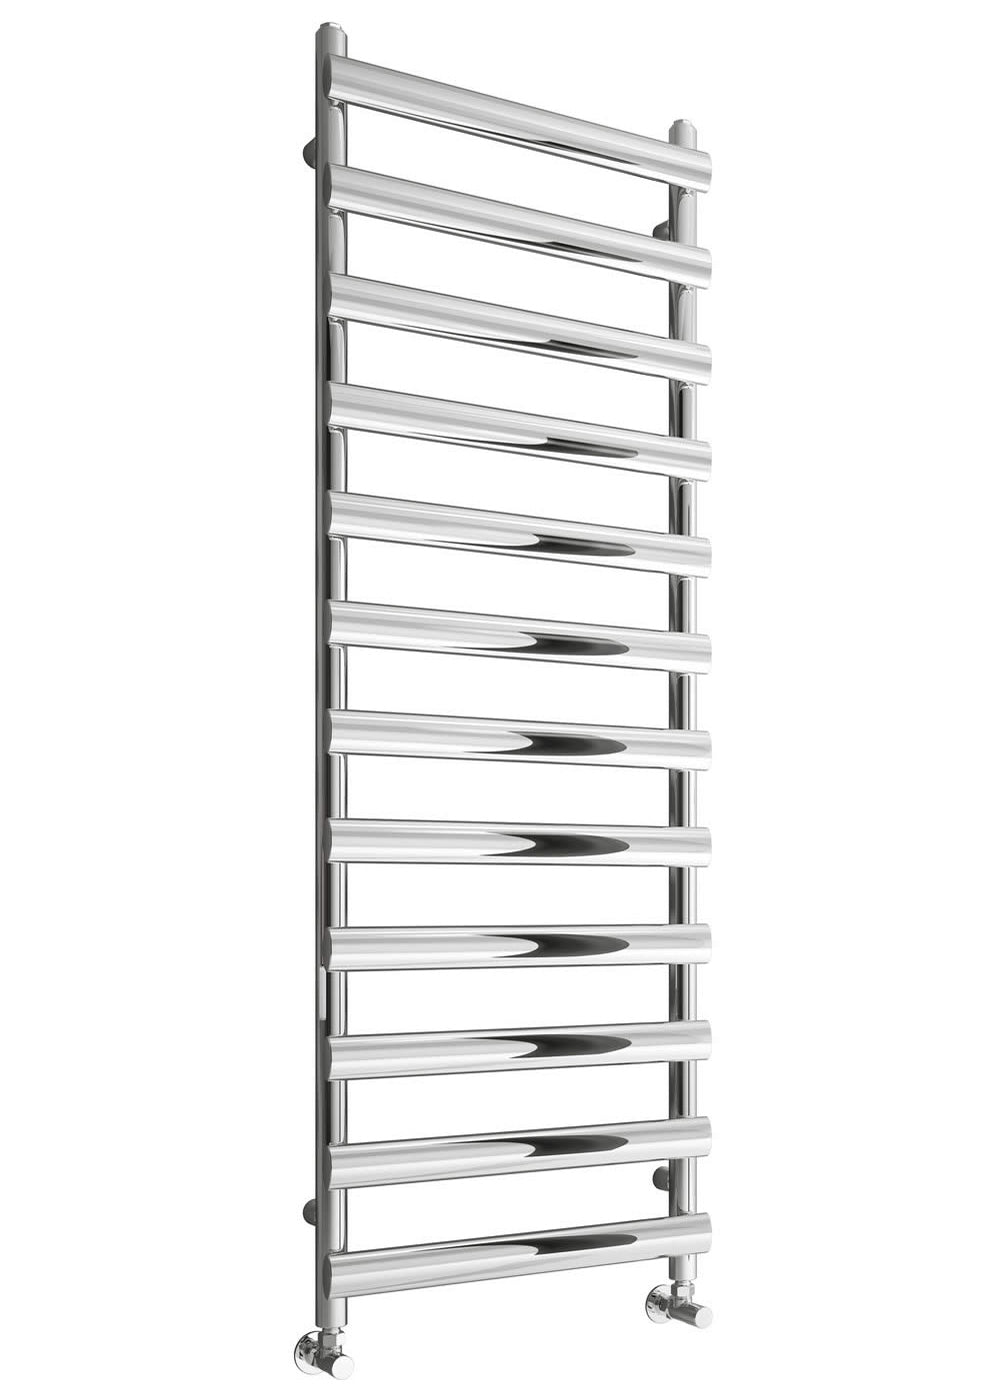 Deno Dual Fuel Stainless Steel Heated Towel Rail - Various Sizes - Polished Stainless Steel